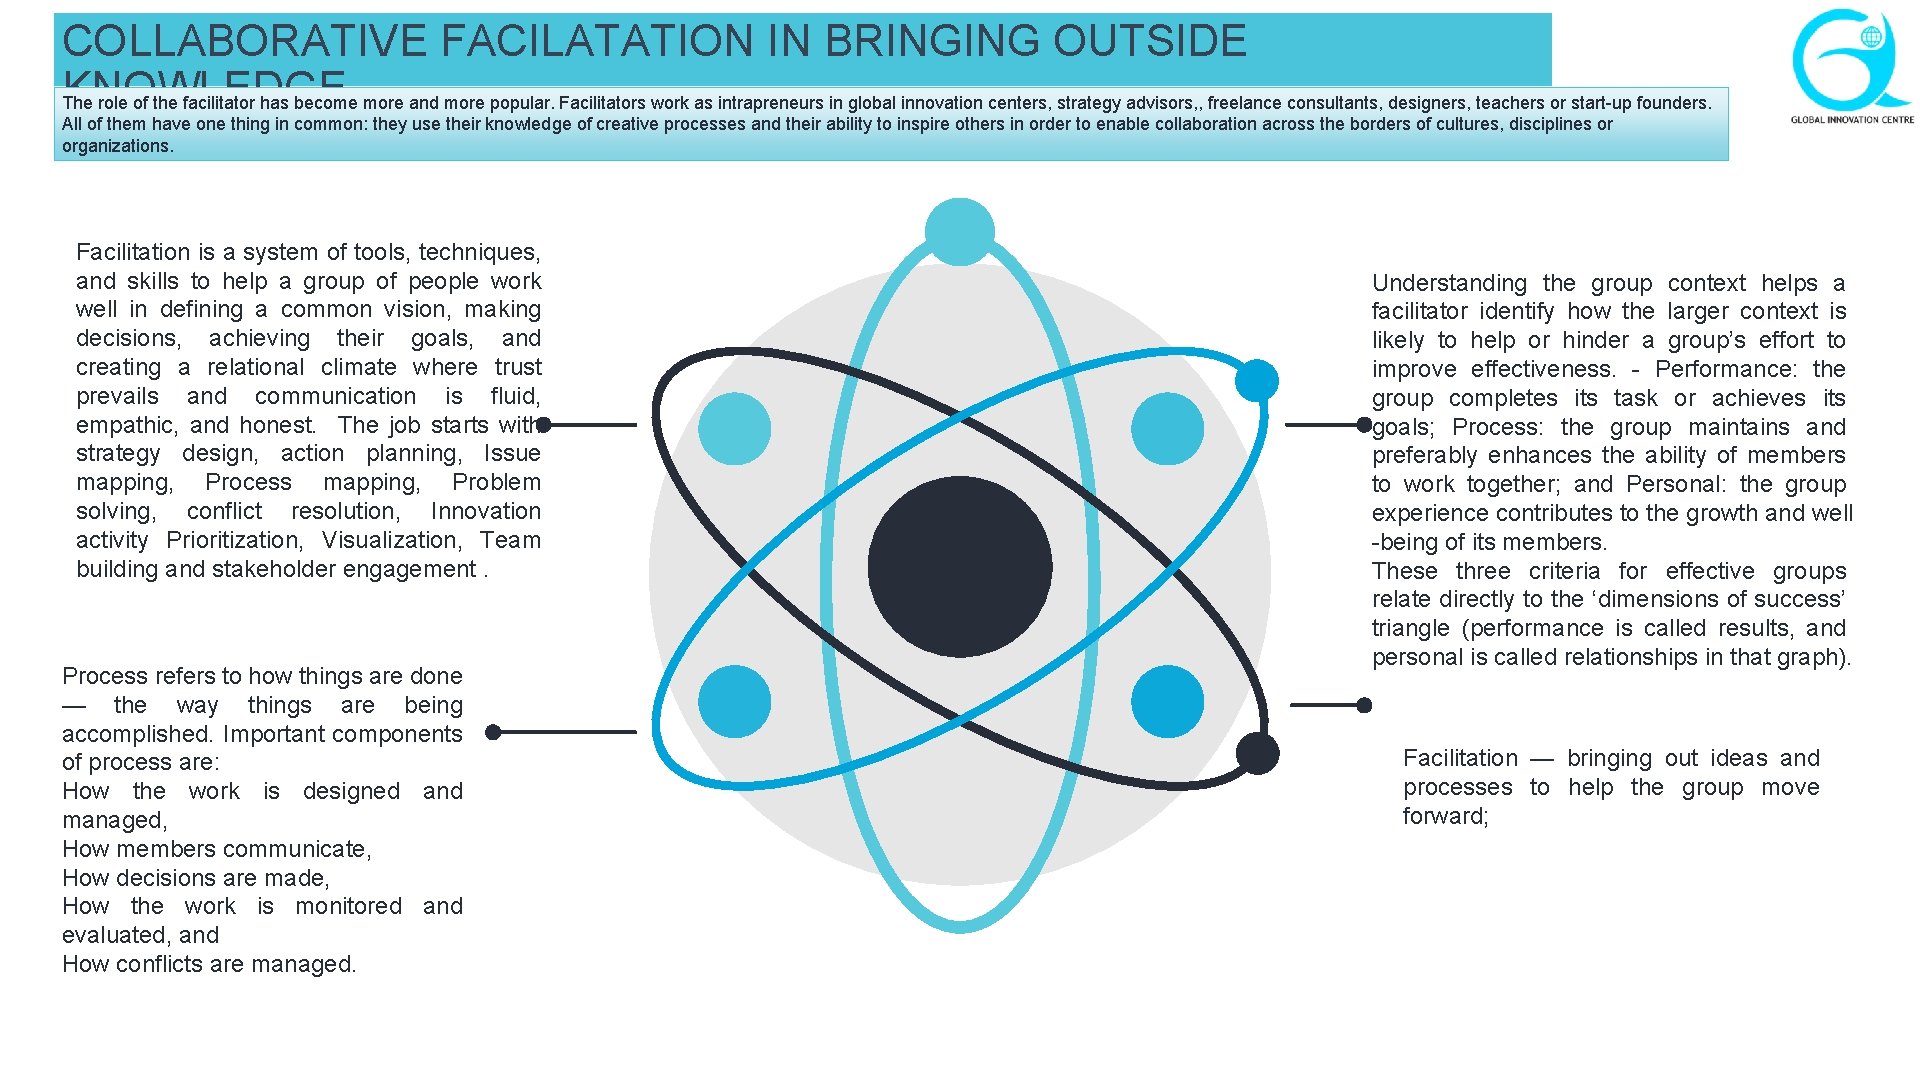 COLLABORATIVE FACILATATION IN BRINGING OUTSIDE KNOWLEDGE The role of the facilitator has become more